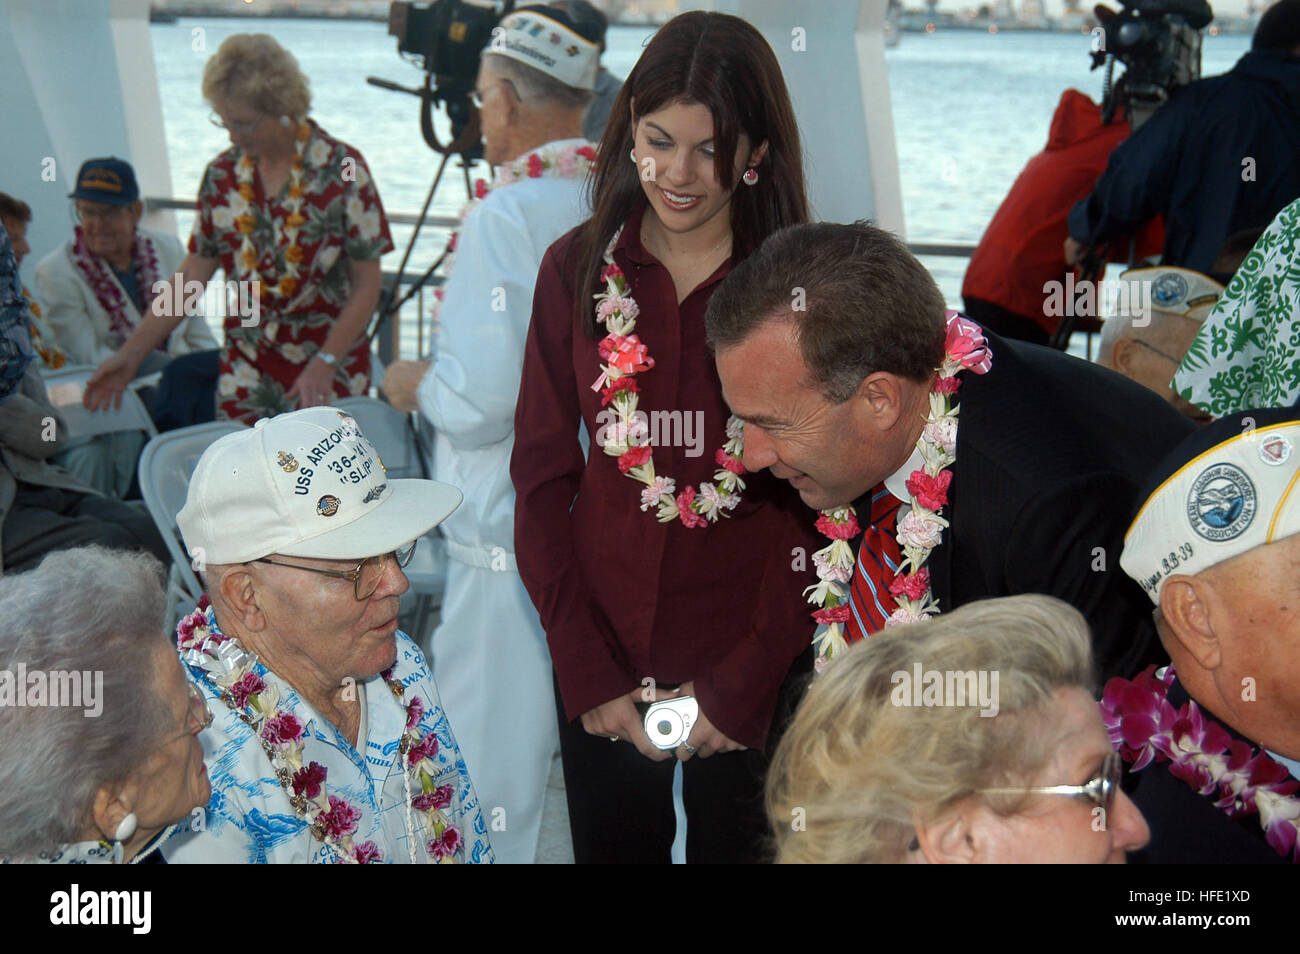 041207-N-6775N-031 Pearl Harbor, Hawaii (Dec. 7, 2004) - Senator Jim Reynolds (R-OK) and his daughter speaks with retired Chief Engineman Charles W. 'Slip' Hailslip about his experiences aboard USS Arizona on the day of the attack on Pearl Harbor. More than 200 distinguished visitors and Pearl Harbor survivors attended the Remembrance Ceremony, which included the Arleigh Burke-class guided missile destroyer USS Chung-Hoon (DDG 93) rendering honors, more than 40 wreath presentations, a 21-gun salute, and a missing man flyover. U.S. Navy photo by Photographer's Mate 2nd Class Justin P. Nesbitt ( Stock Photo